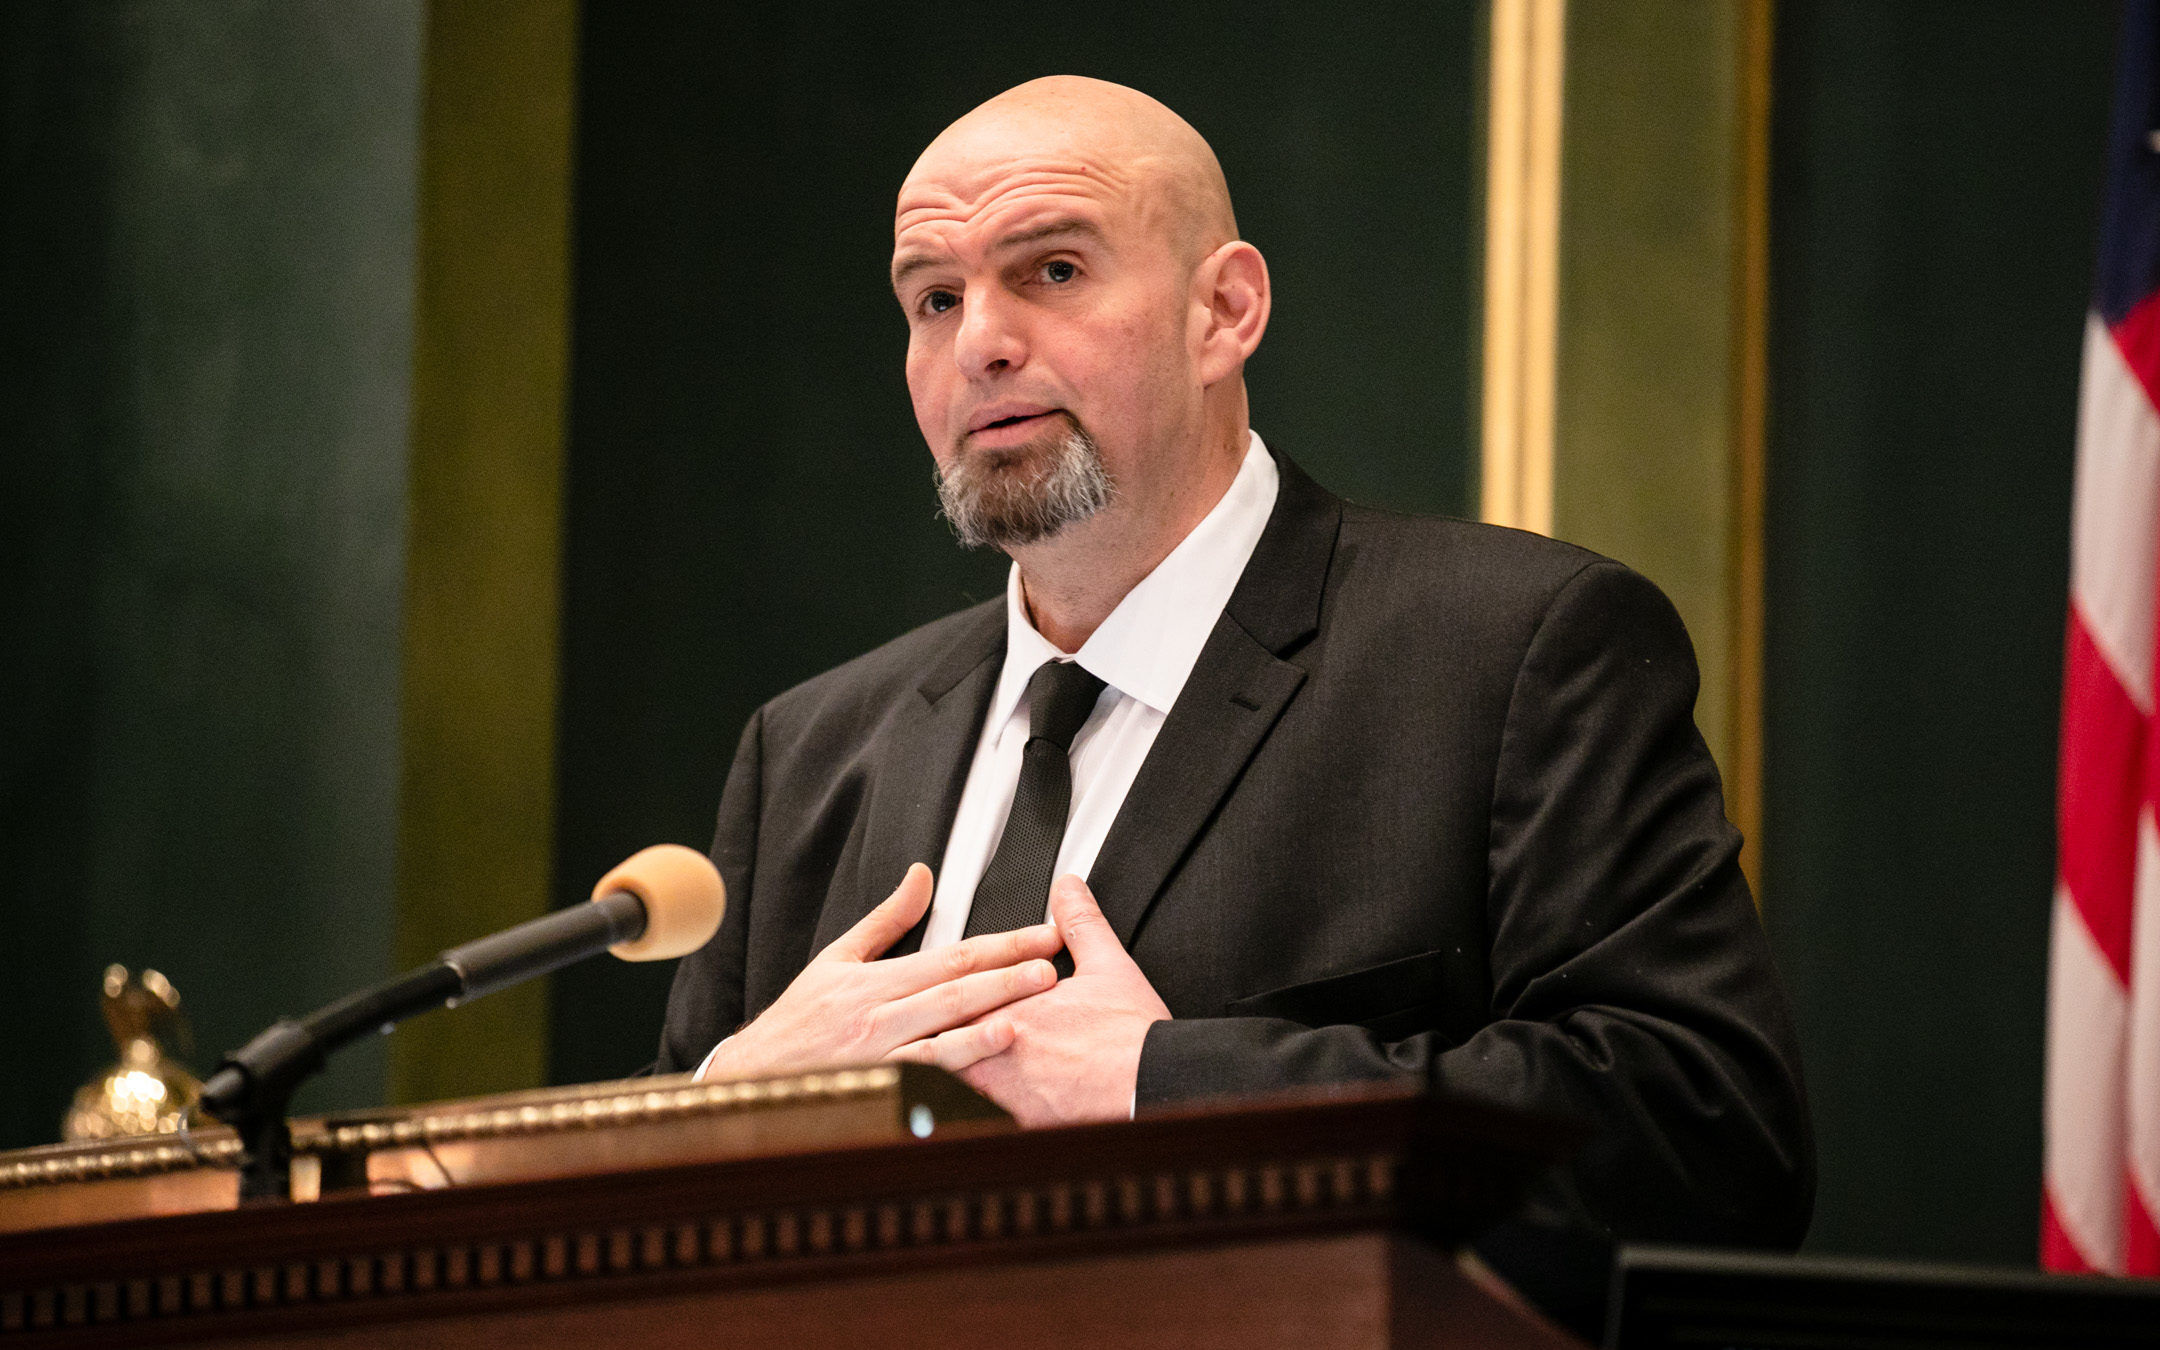 Lt. Governor John Fetterman at the 2019 Inauguration of Governor Tom Wolf and Lieutenant Governor John Fetterman